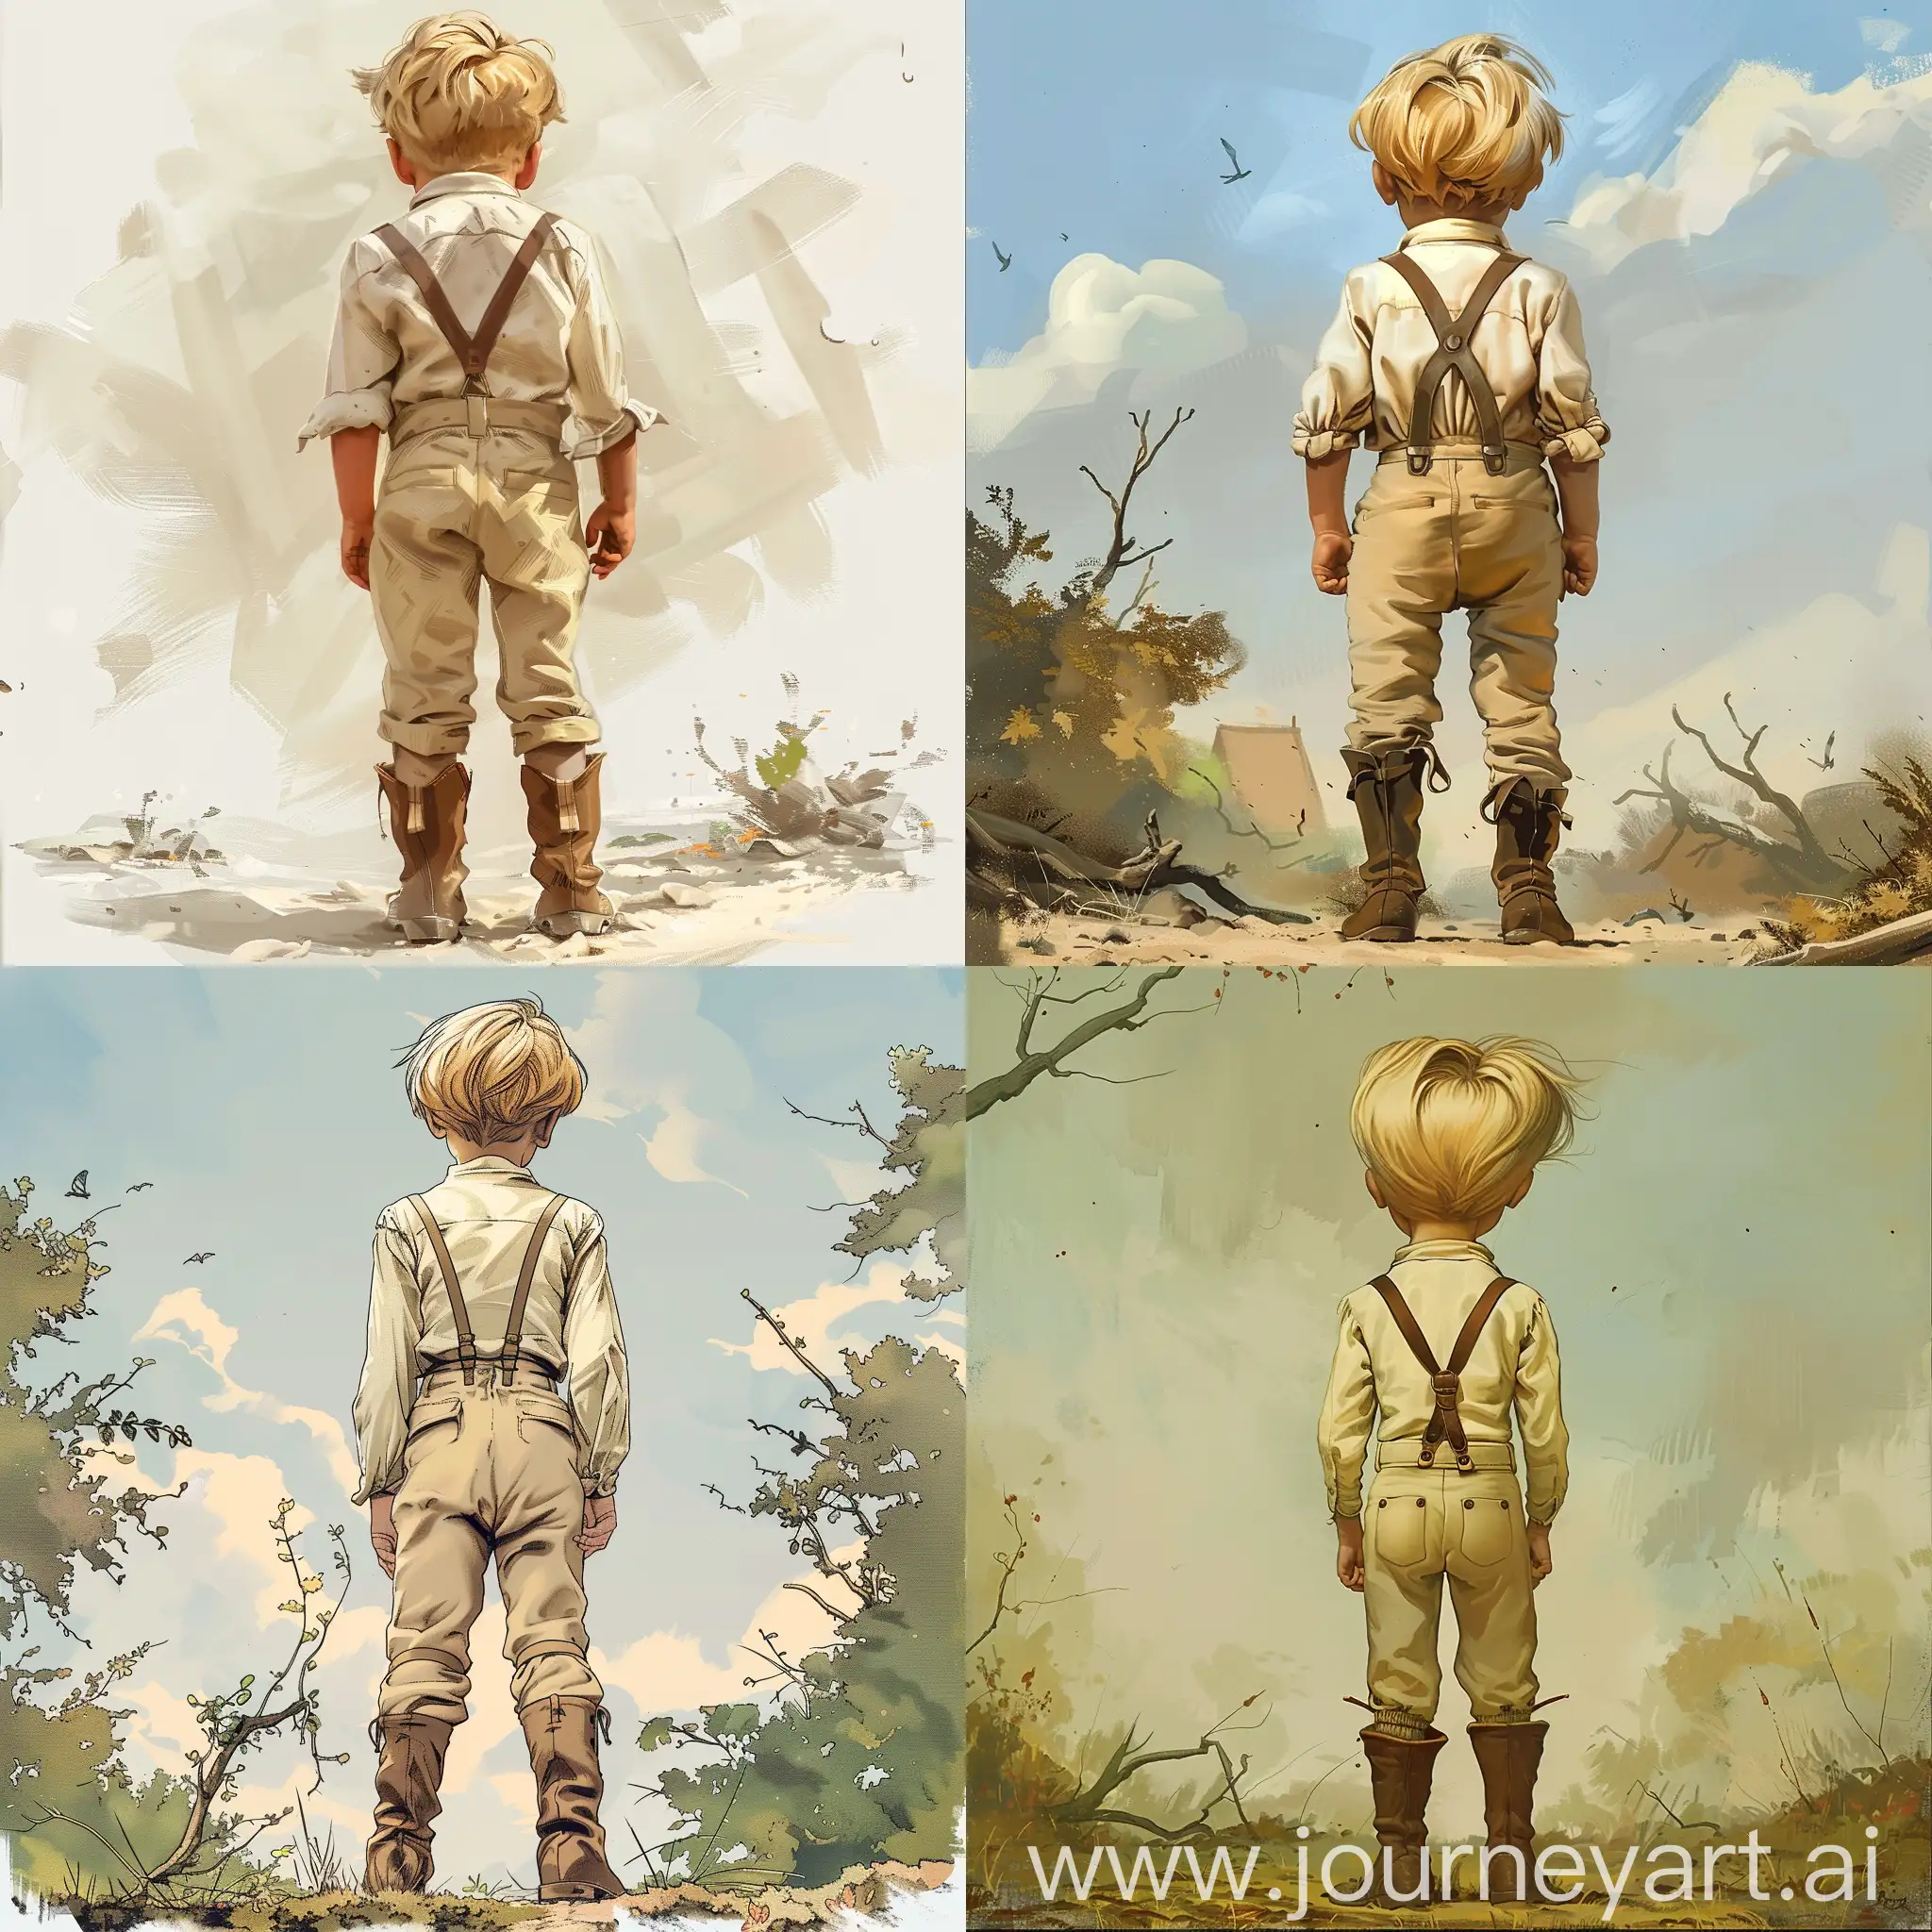 shot from behind, from behind, in full length, of a child boy, with blond hair, in high brown bootssimple light pants with suspenders, a shirt and , standing in a clearing, in full growth, cartoon style, illustration style for a children's book, art, high quality , high detail, art, high quality, high detail, pastel colors